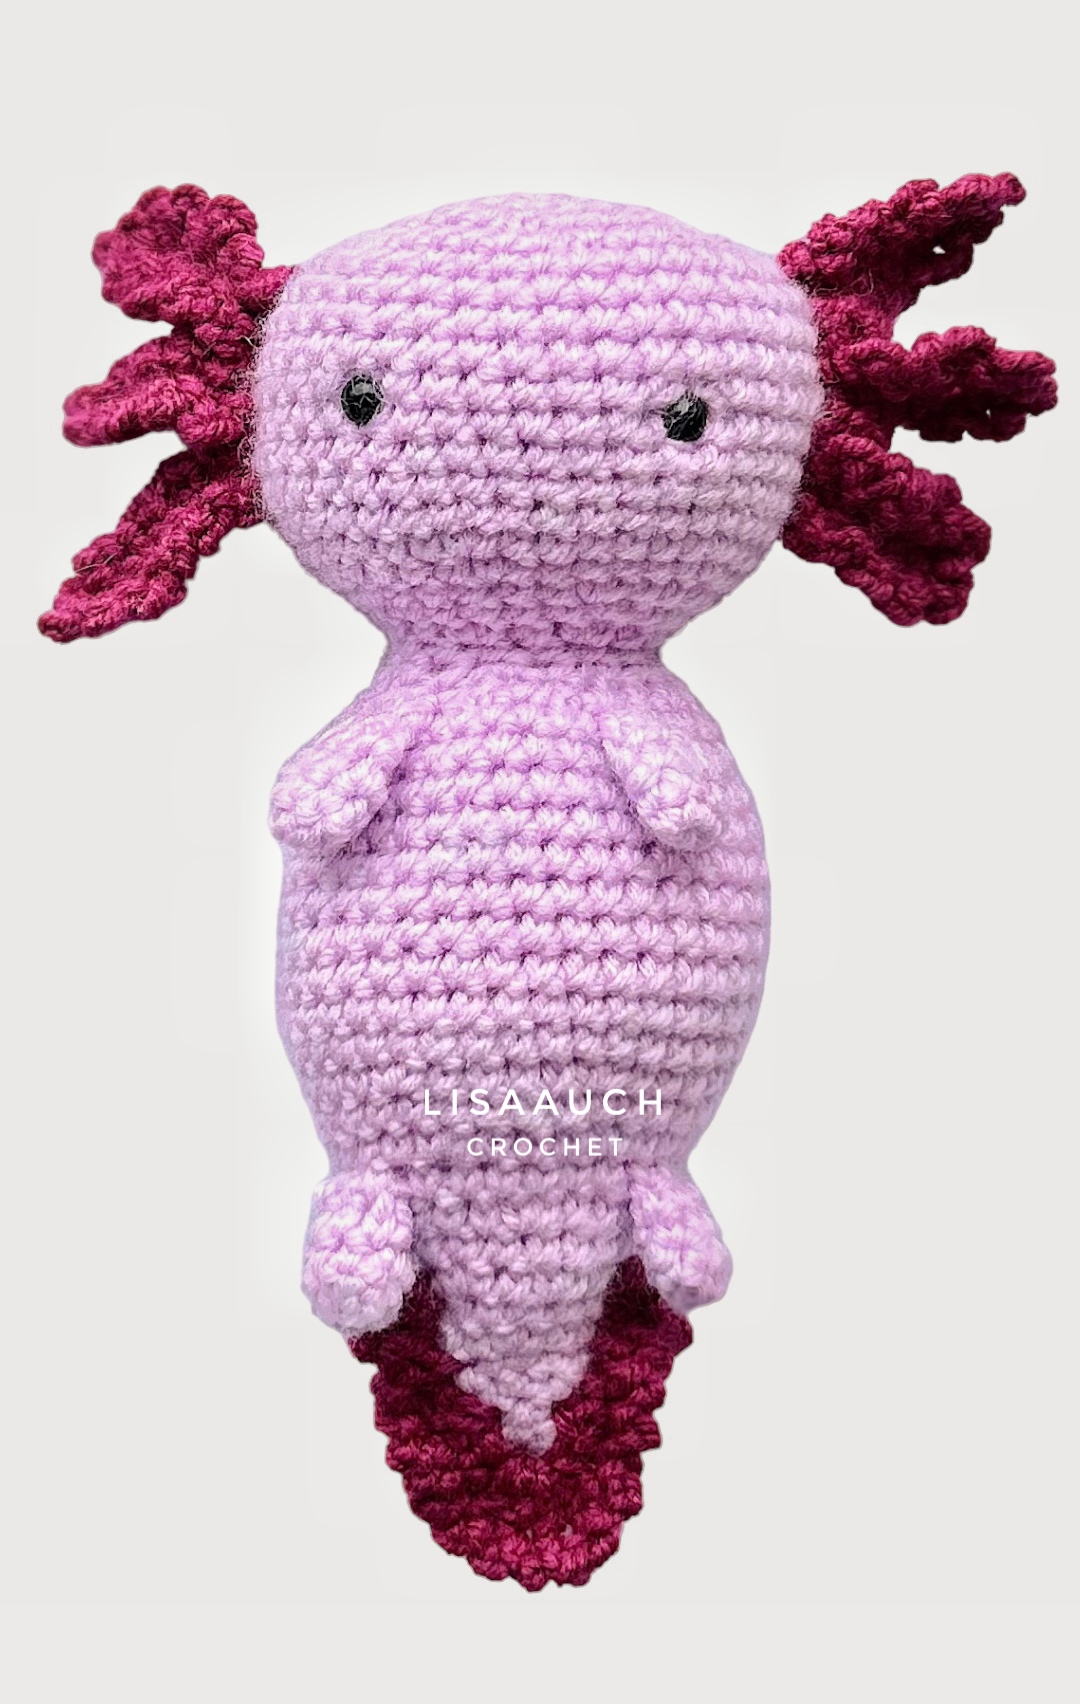 FREE + NO-SEW Crochet Plushie Patterns You NEED To Make! Amigurumi Patterns  That Are Quick and Free 